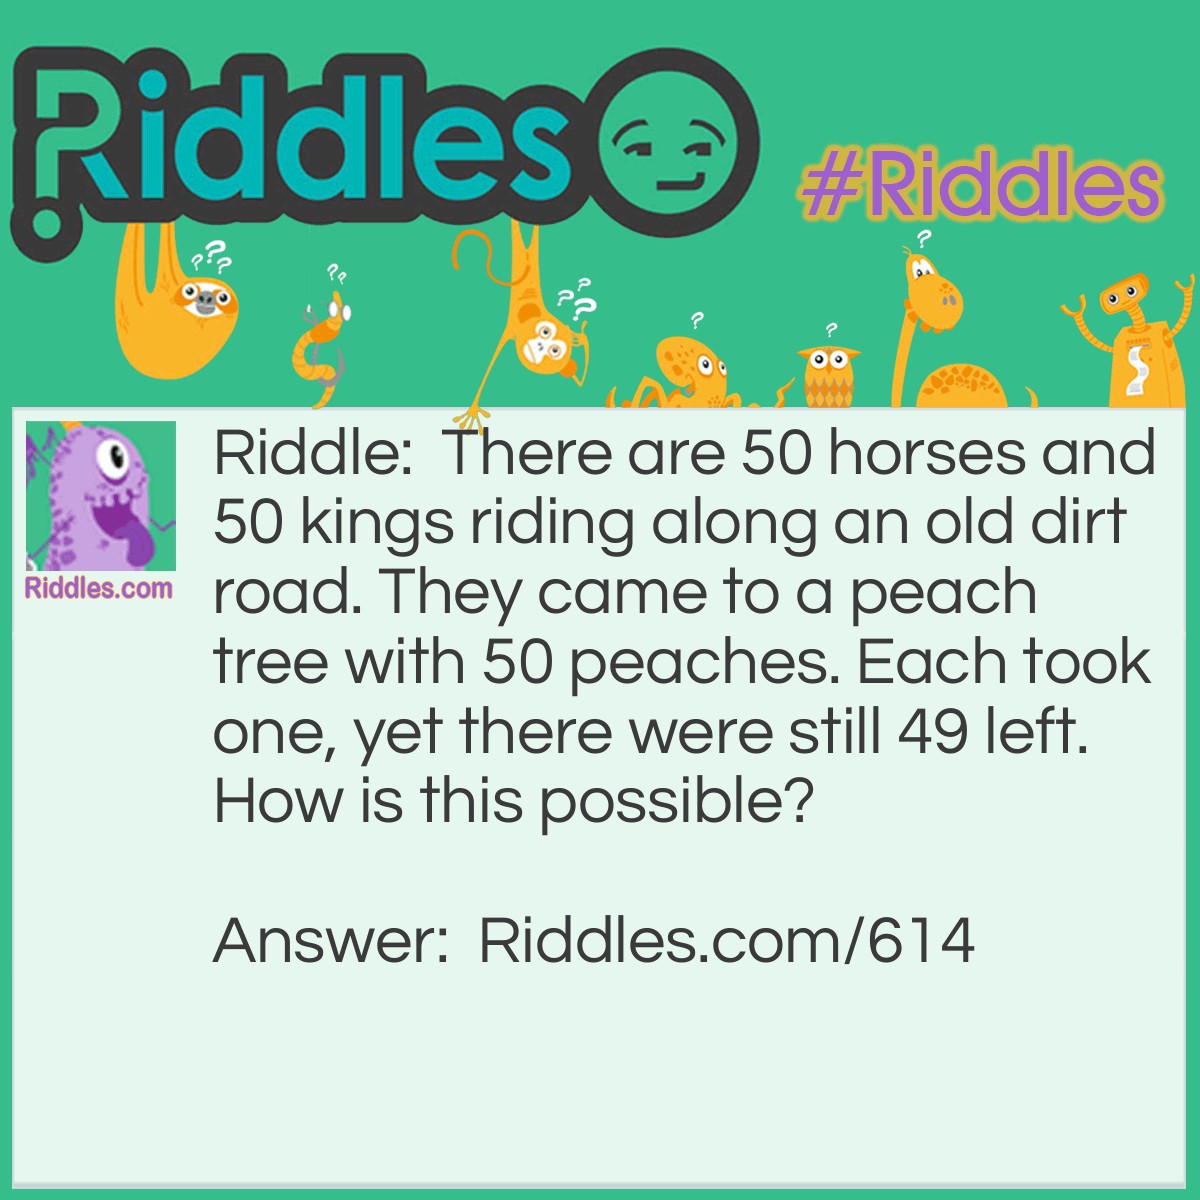 Riddle: There are 50 horses and 50 kings riding along an old dirt road. They came to a peach tree with 50 peaches. Each took one, yet there were still 49 left. How is this possible? Answer: Each is the name of one of the kings and he's the only one that took one!